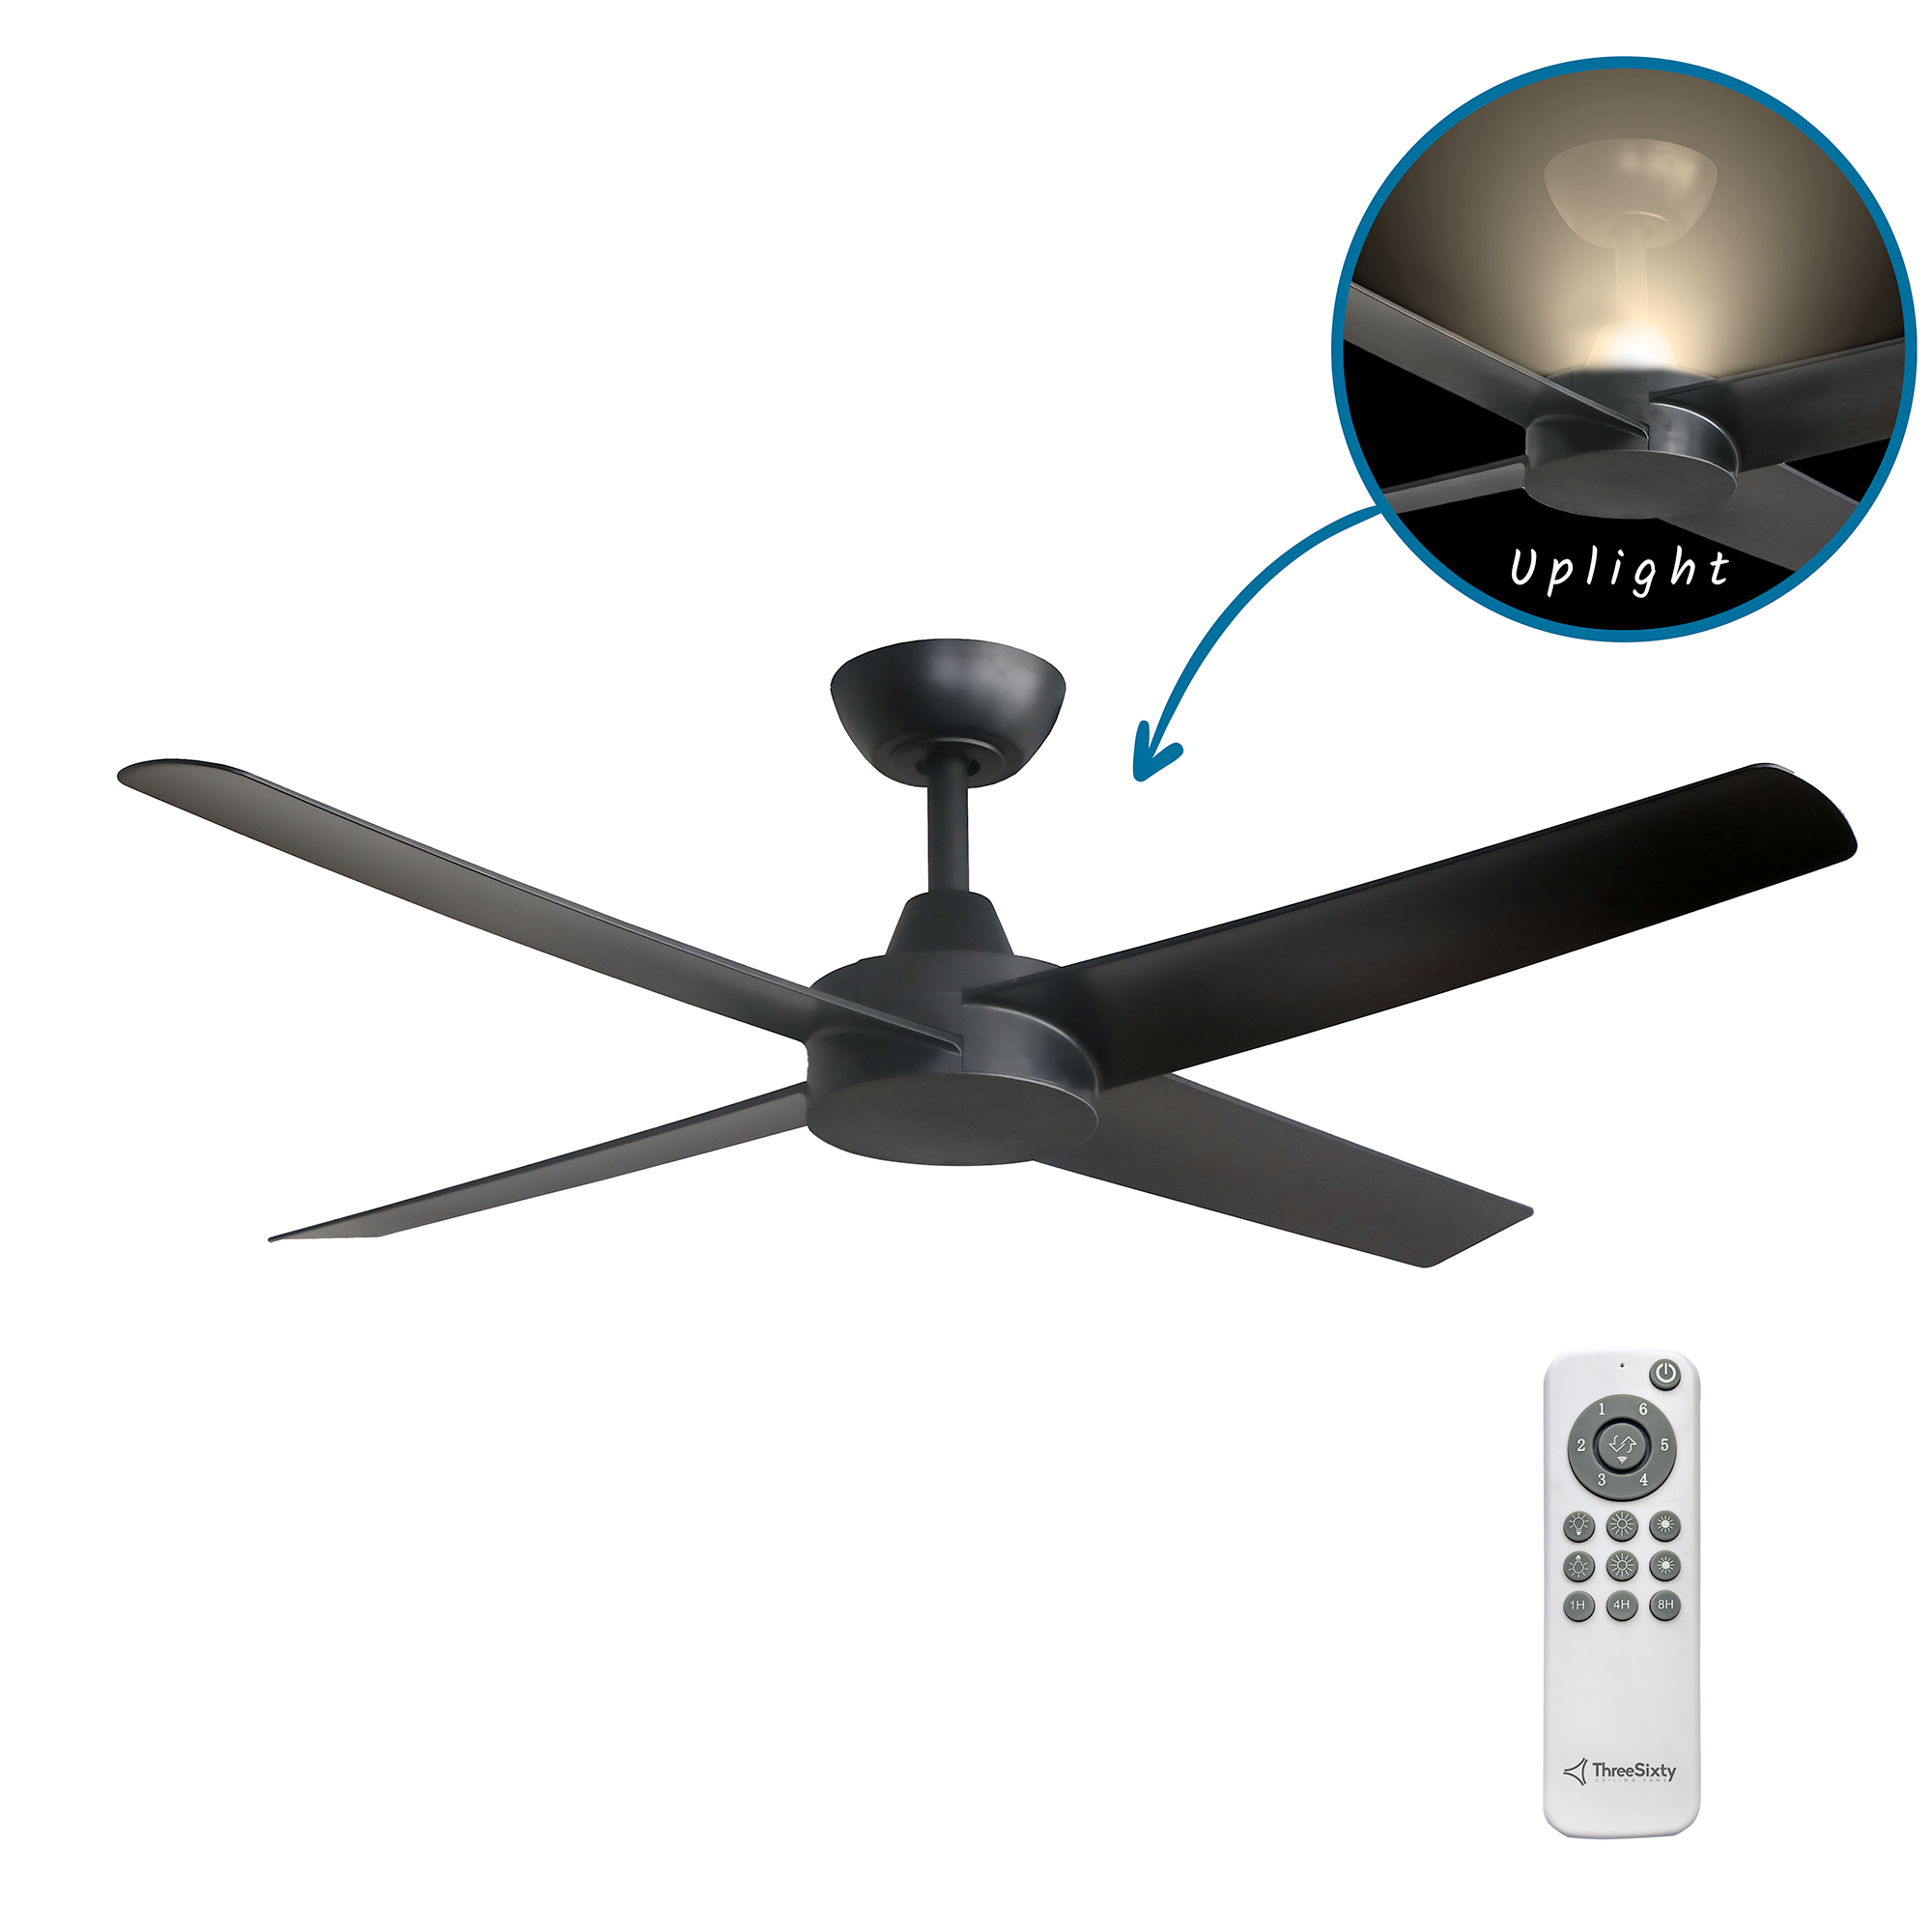 48" Ambience DC Ceiling Fan in Black with Built-in Uplight